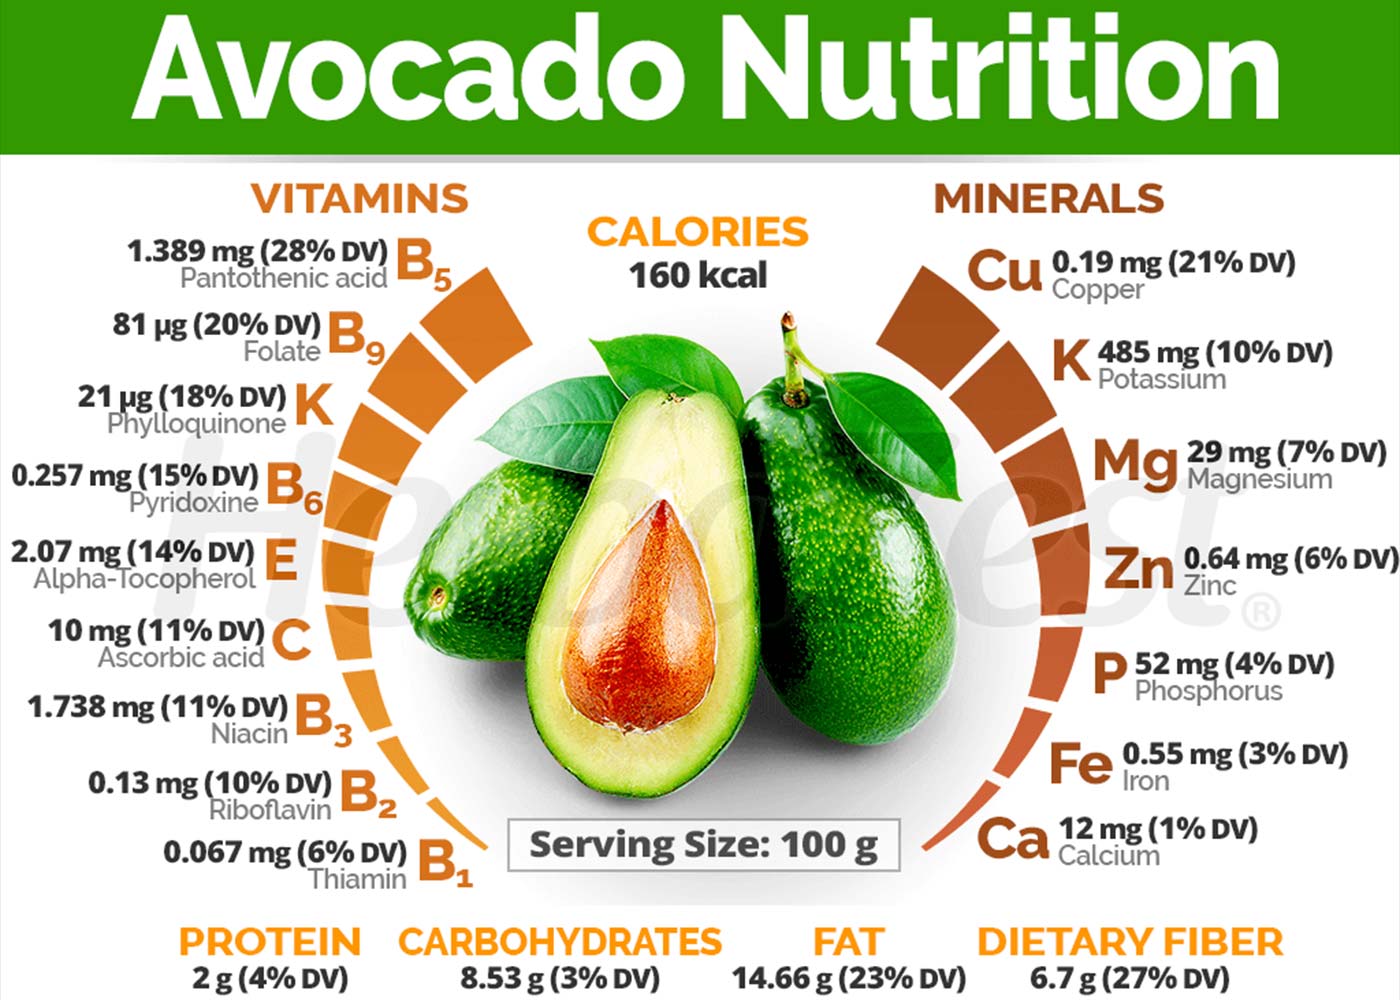 Avocados 101: Nutrition Facts, Health Benefits, and More